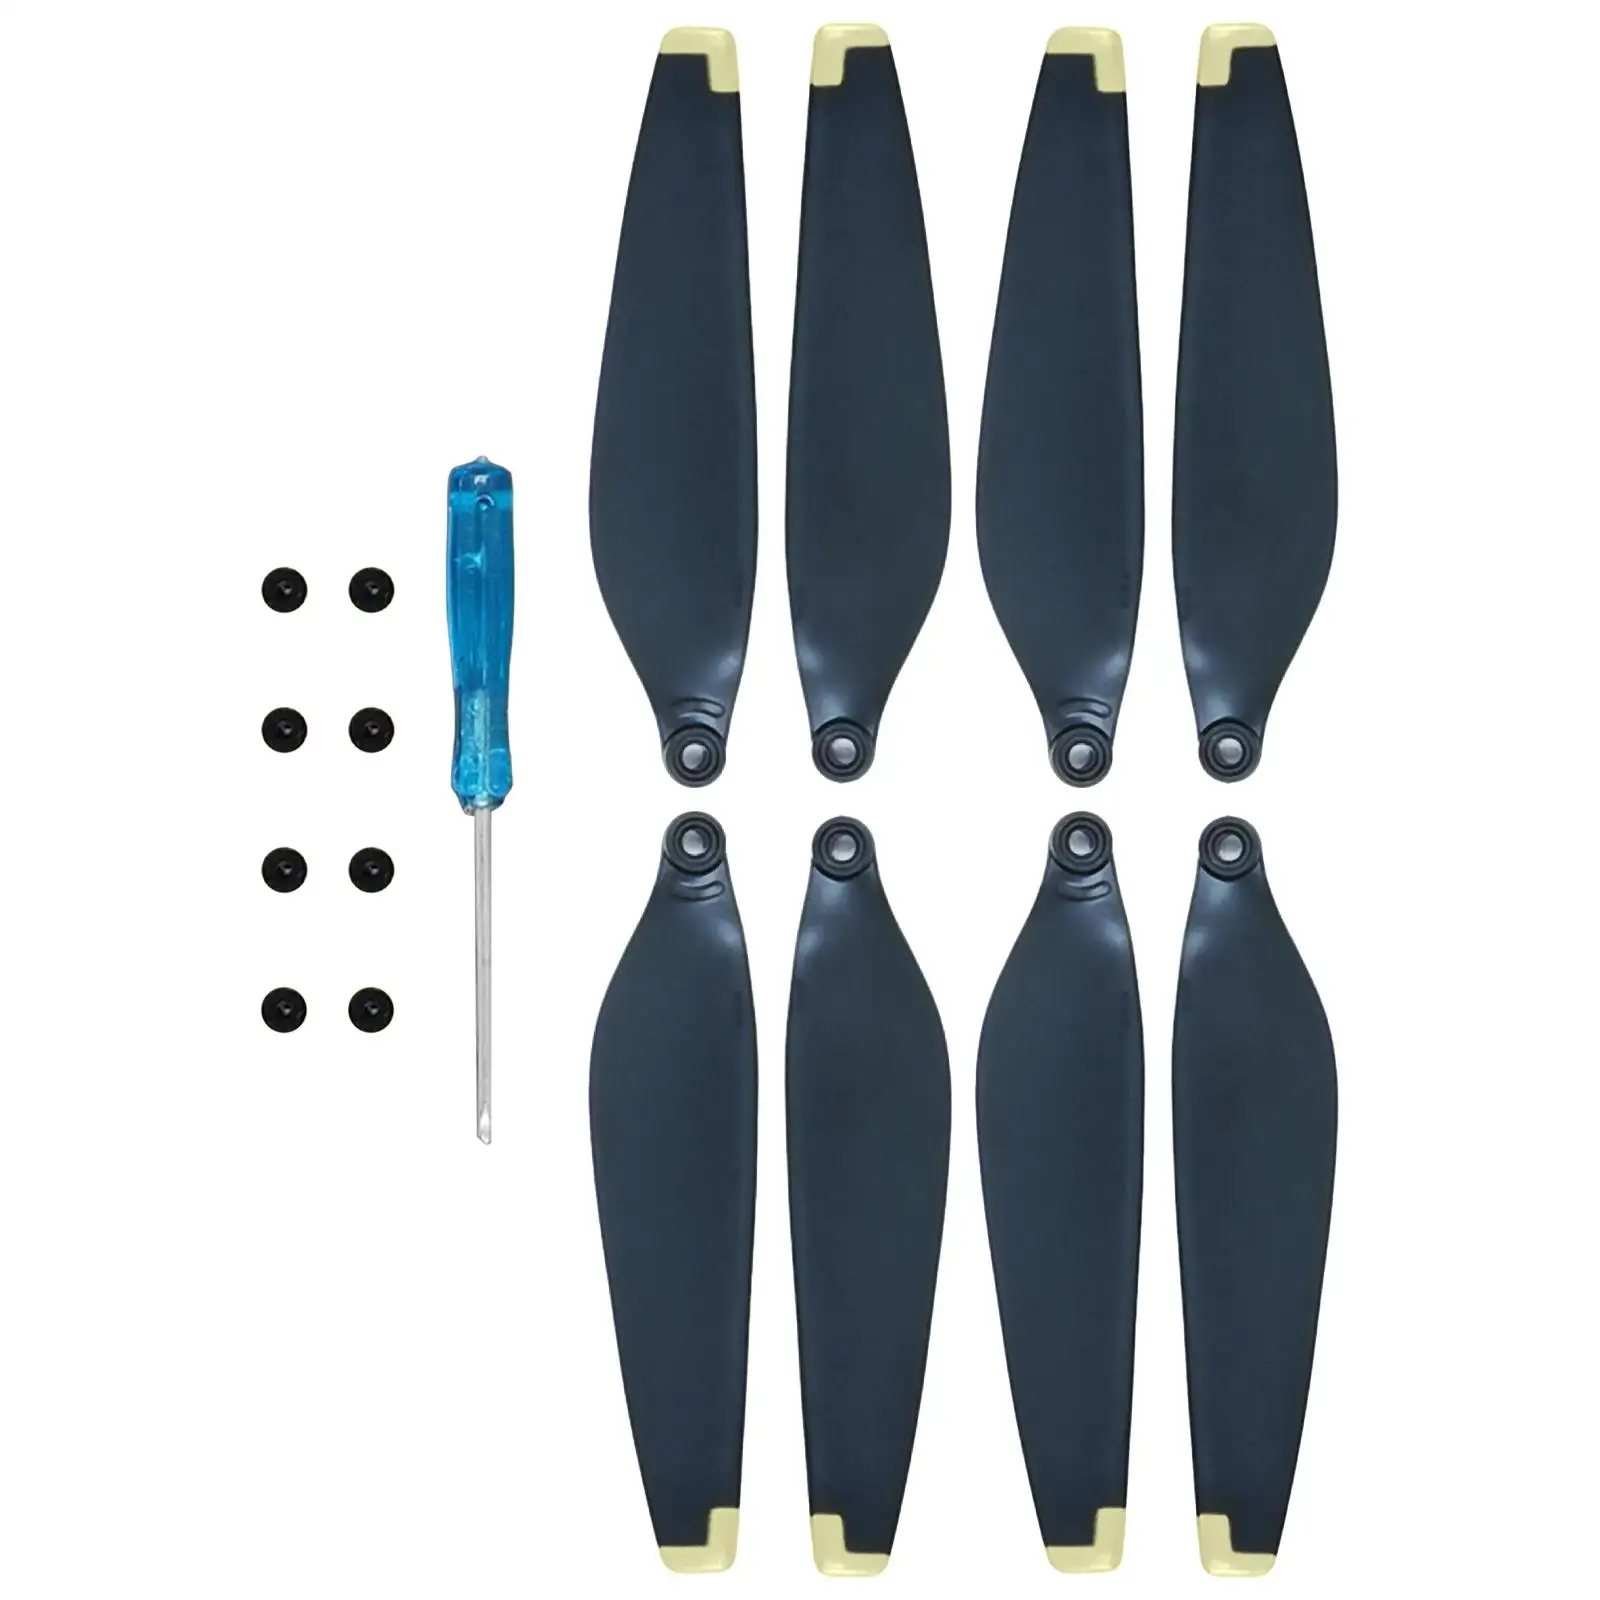 8 Pieces Propeller Wing Fans Upgrade Parts Lightweight Quick Release Blade Props Drone Quadcopter for DJI Mavic Mini Accessories